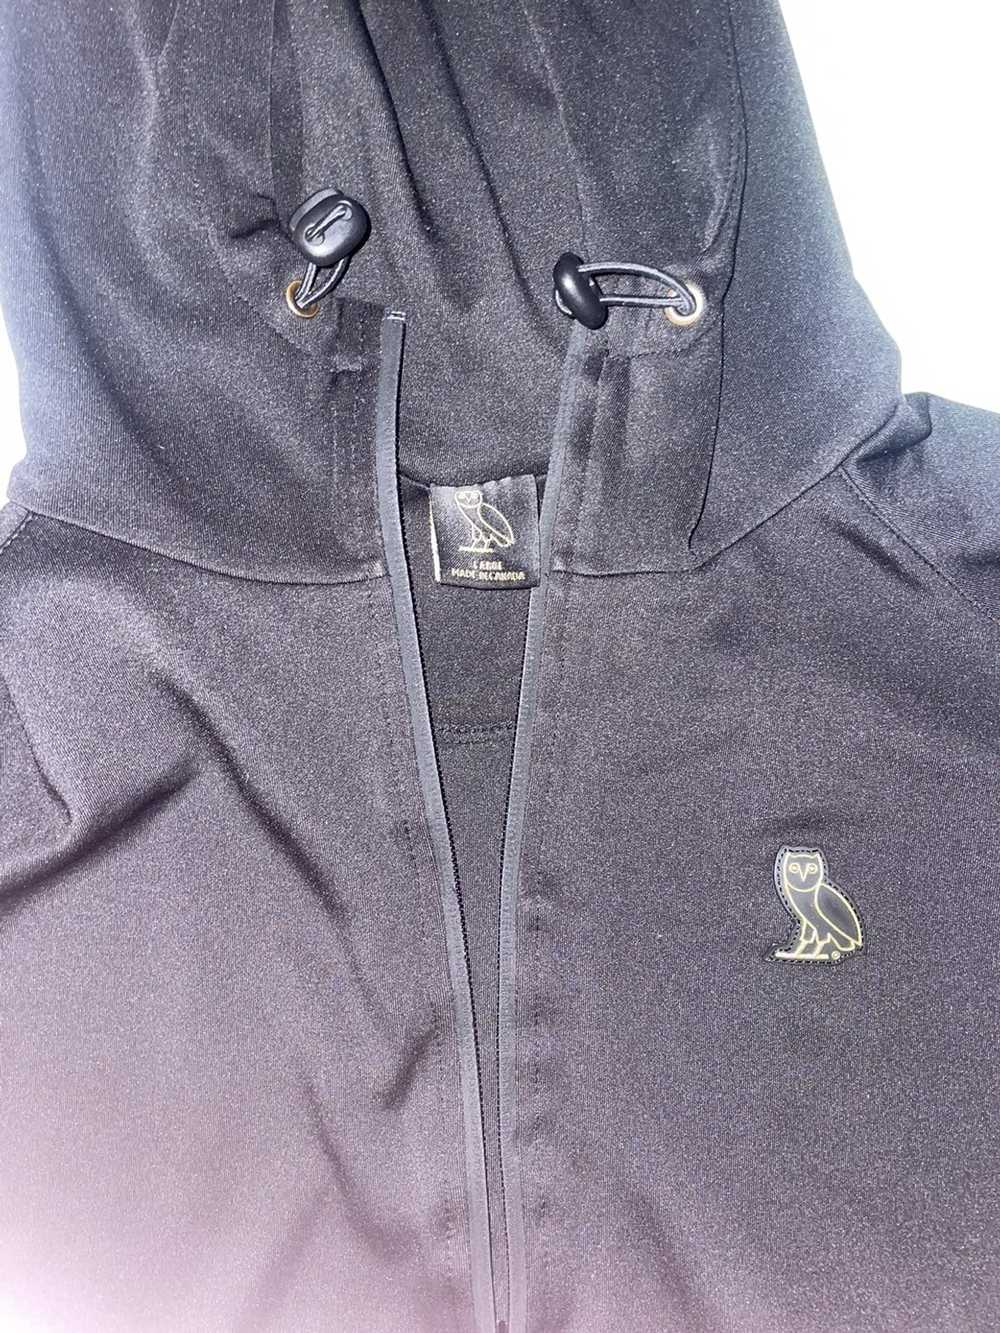 Octobers Very Own OVO small owl logo hoodie - image 2